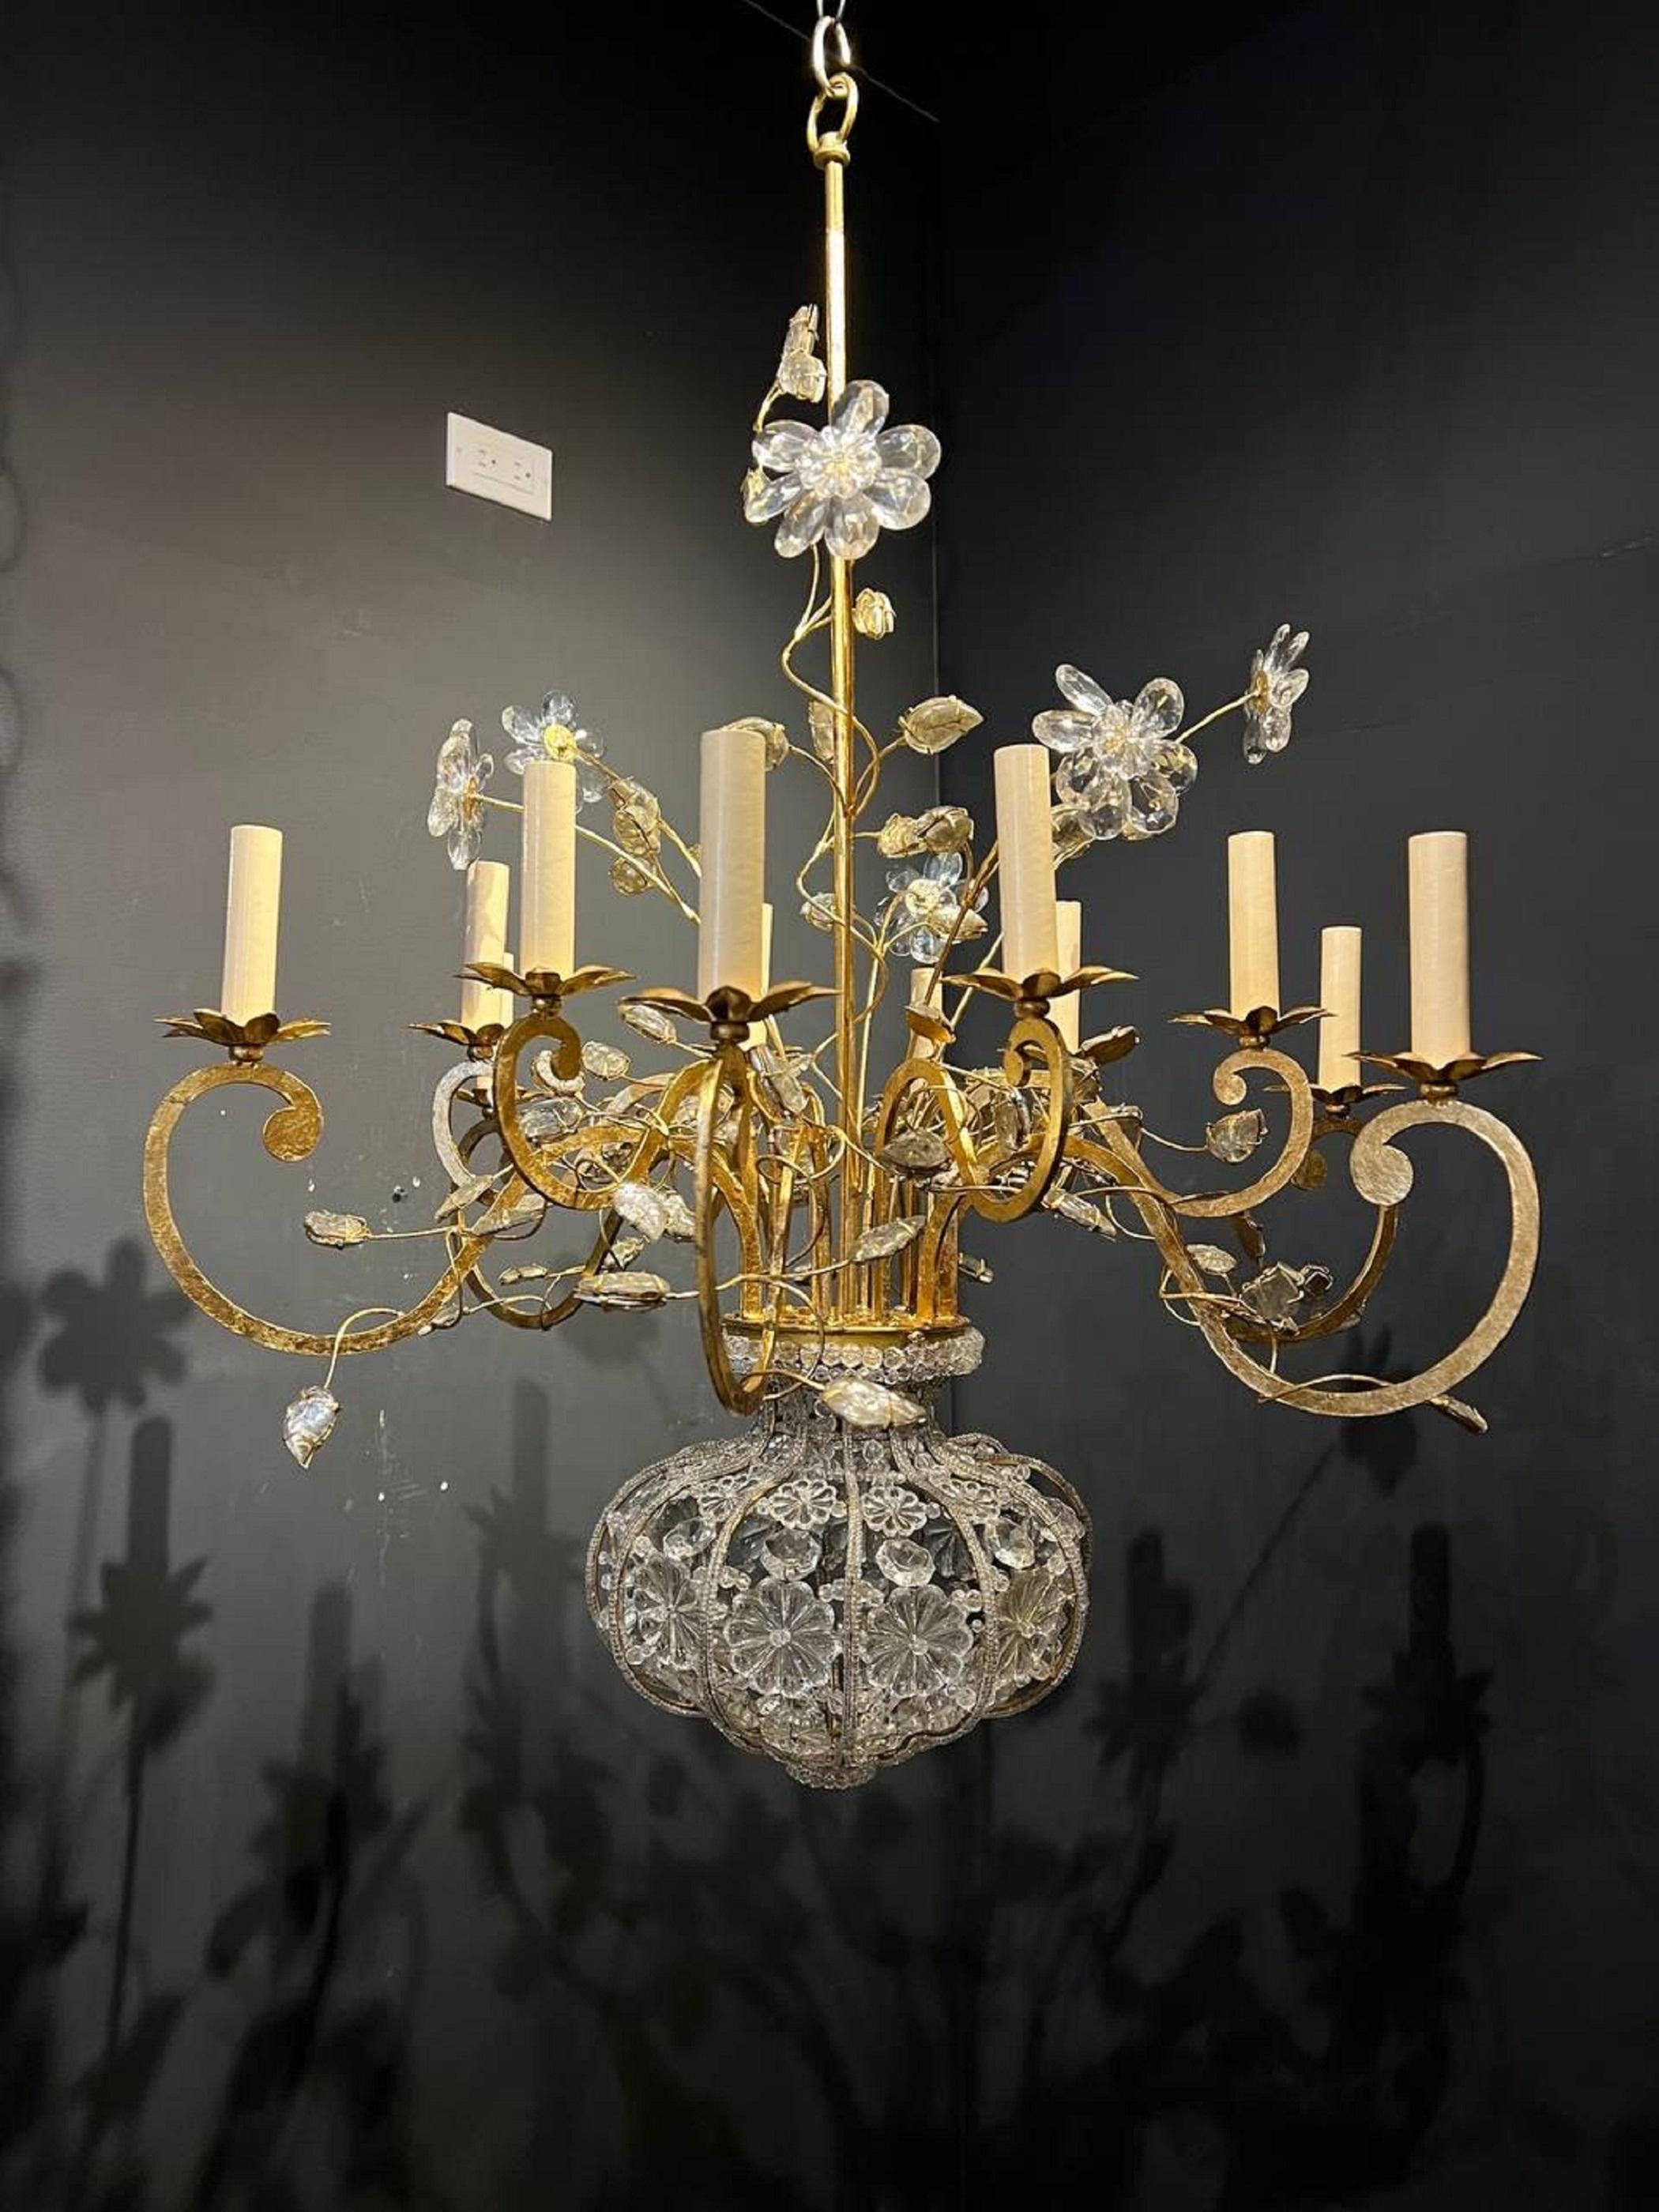 A circa 1930’s French gilt metal and crystal chandelier with 12 lights. Floral design and crystal bottom part.
Dealer: G302YP.